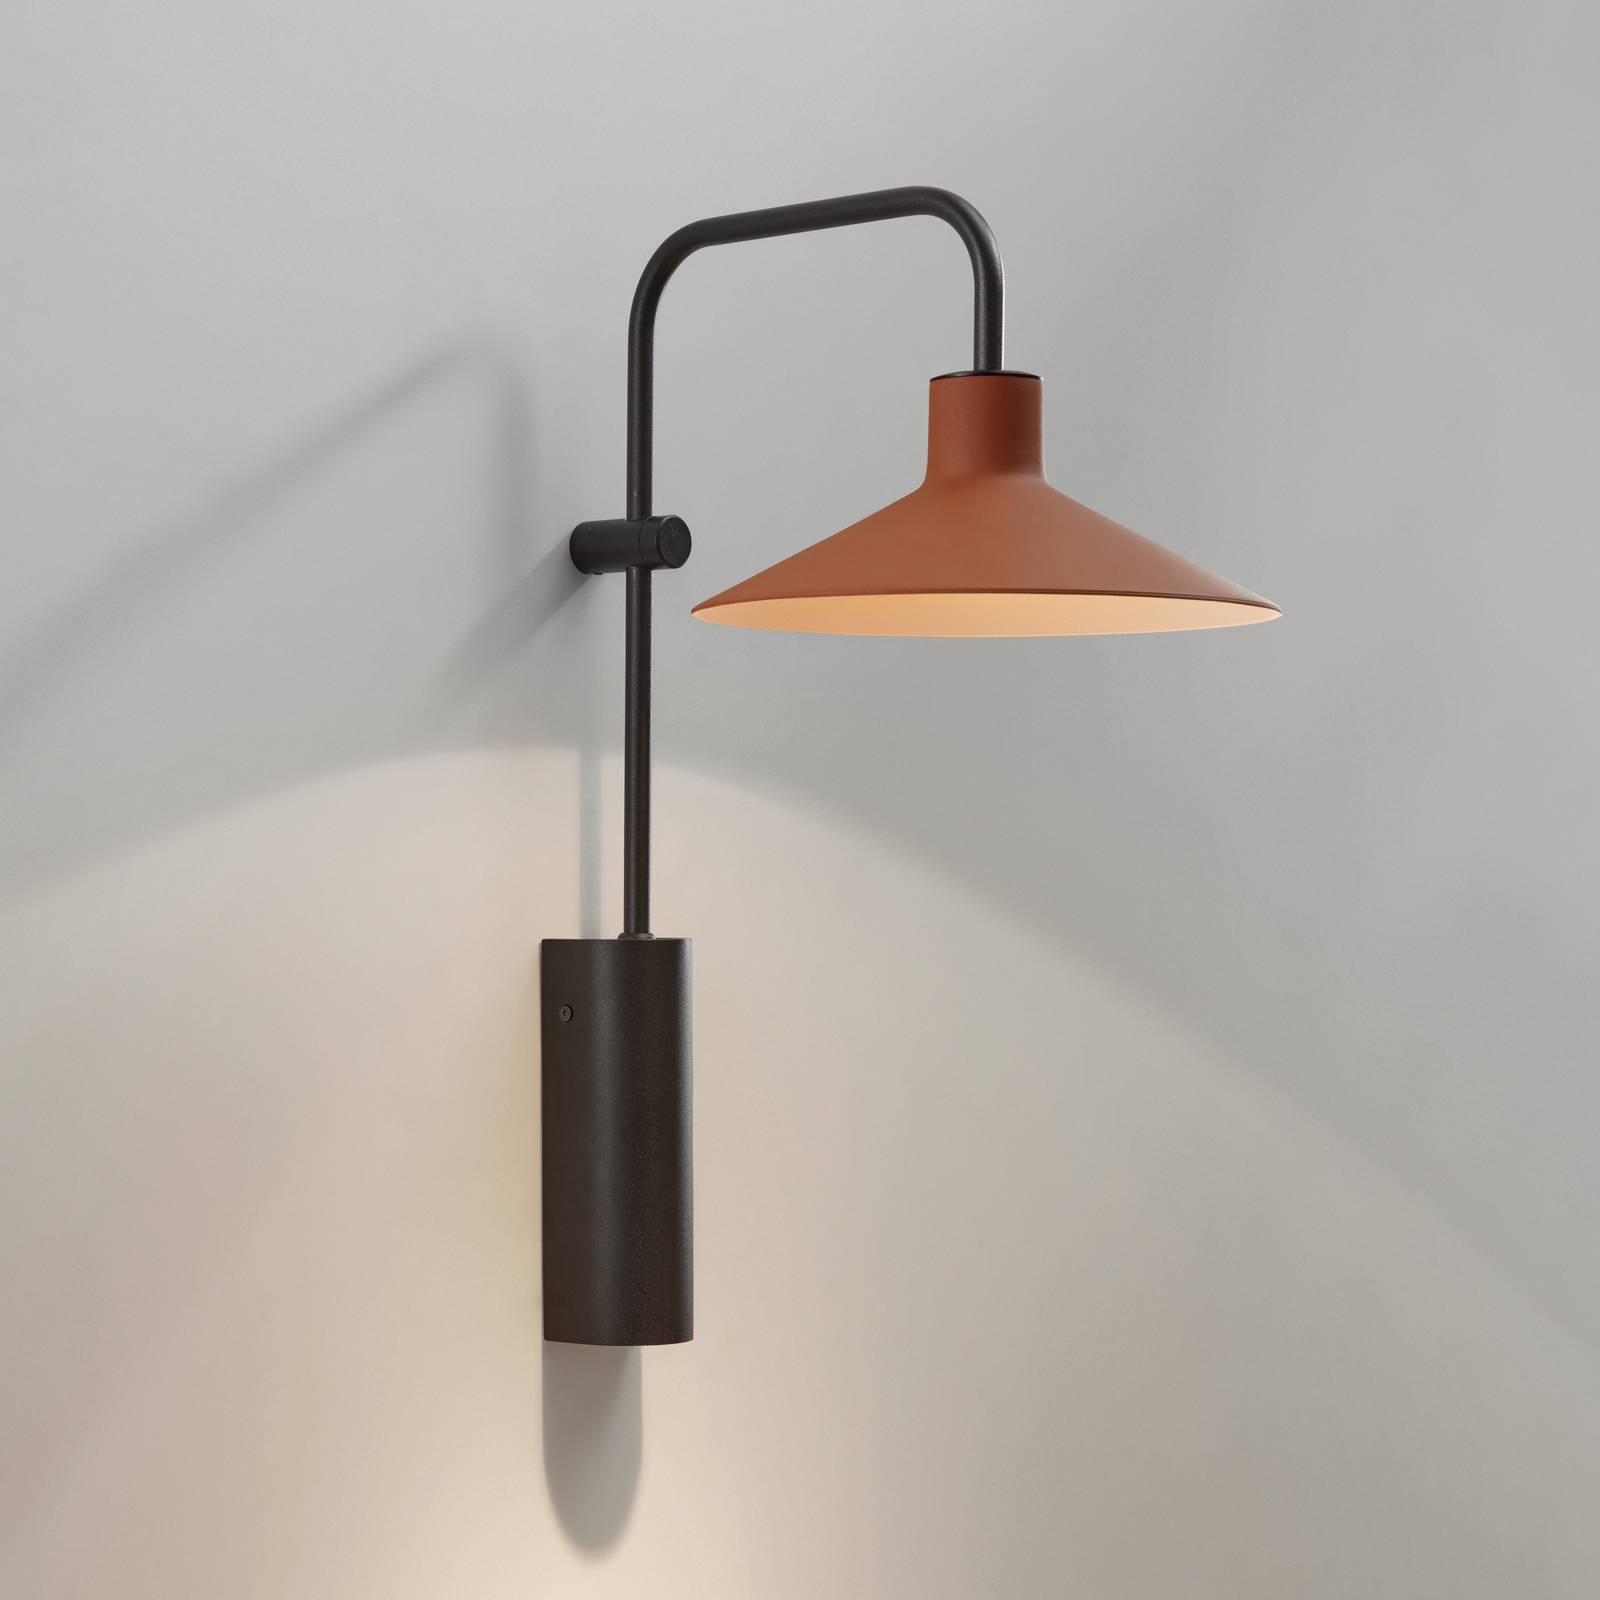 Bover Platet A02 wall lamp E14 switch terracotta